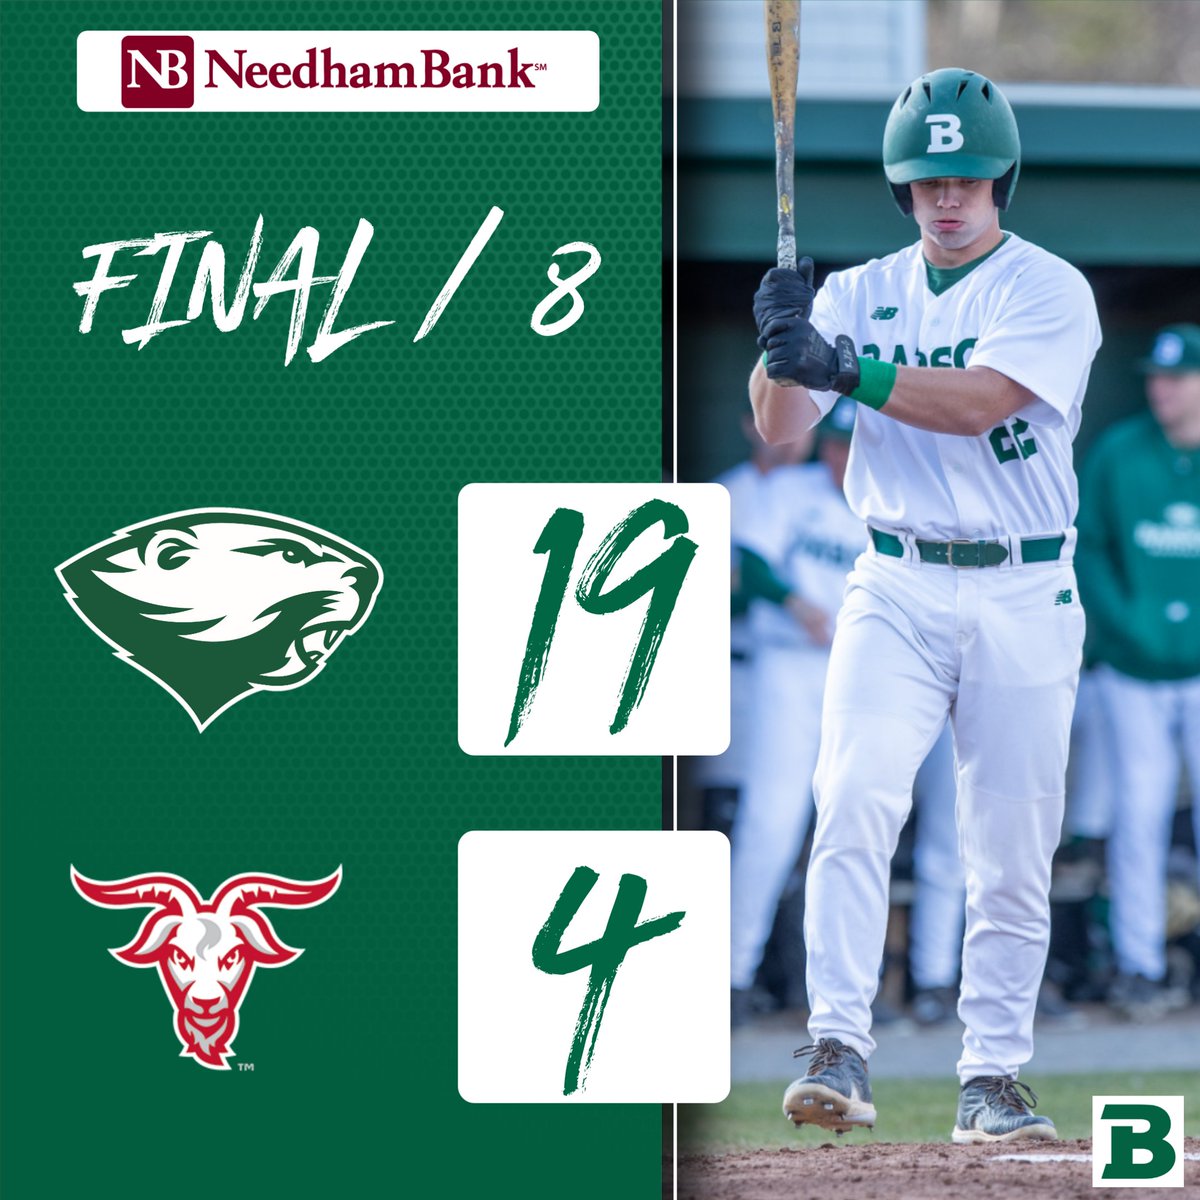 John Nowak, Luke Tanner, Alexander Wilson and Jack Julian combined for 15 hits and 10 runs batted in as @BabsonBaseball rolled to an 18-4 eight-inning victory in game two of Sunday's doubleheader. #GoBabo #d3baseball